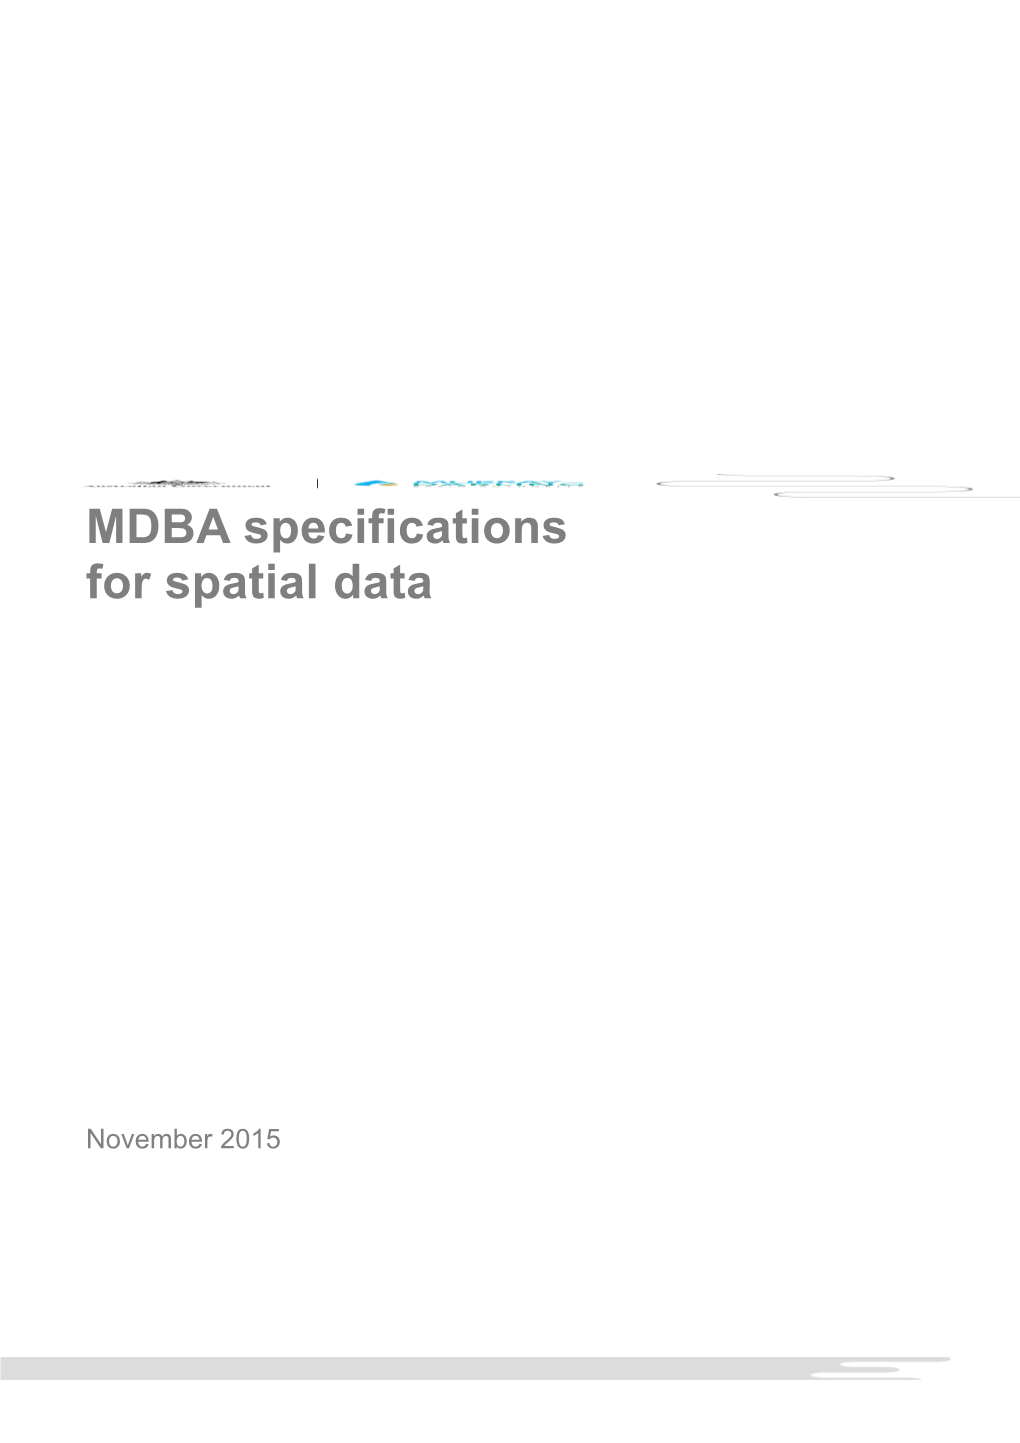 MDBA Specifications for Spatial Data